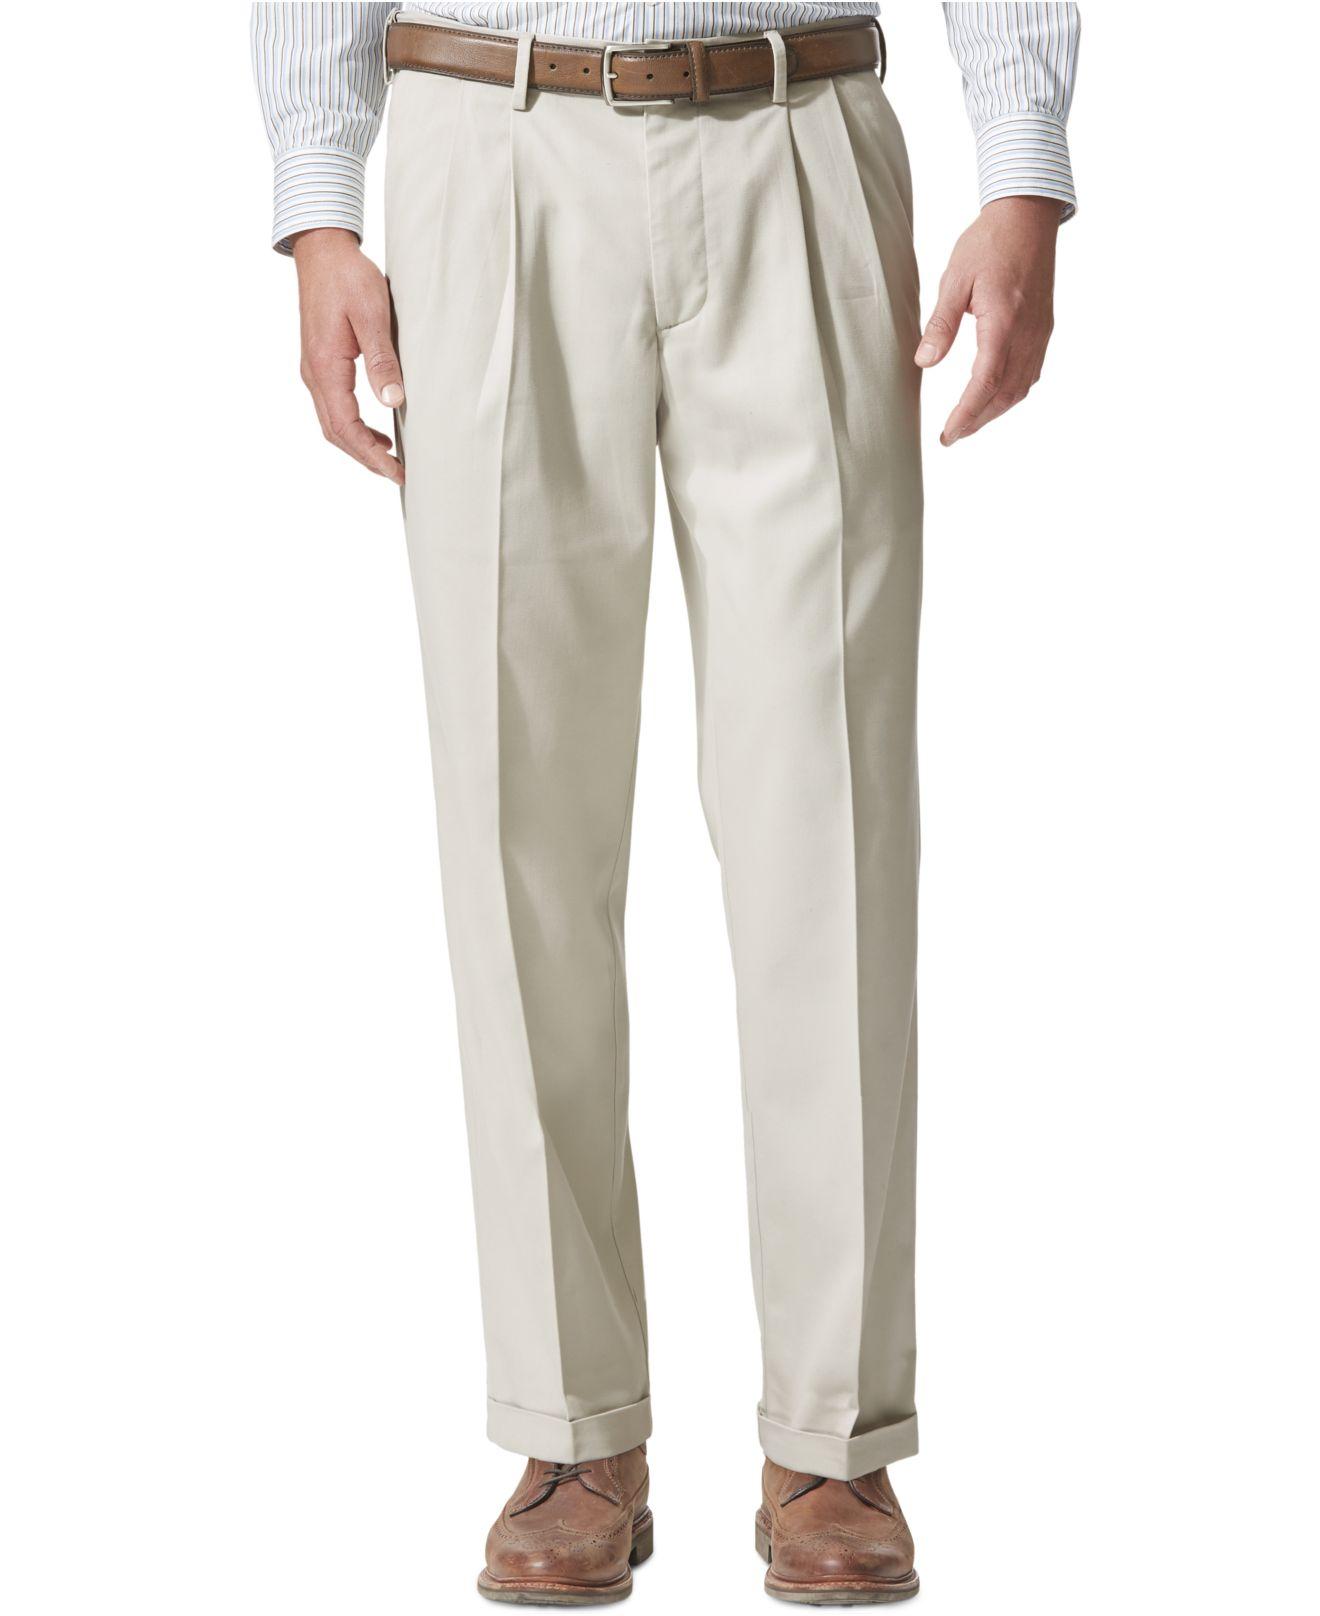 Dockers Cotton Comfort Relaxed Pleated Cuffed Fit Khaki Stretch Pants ...